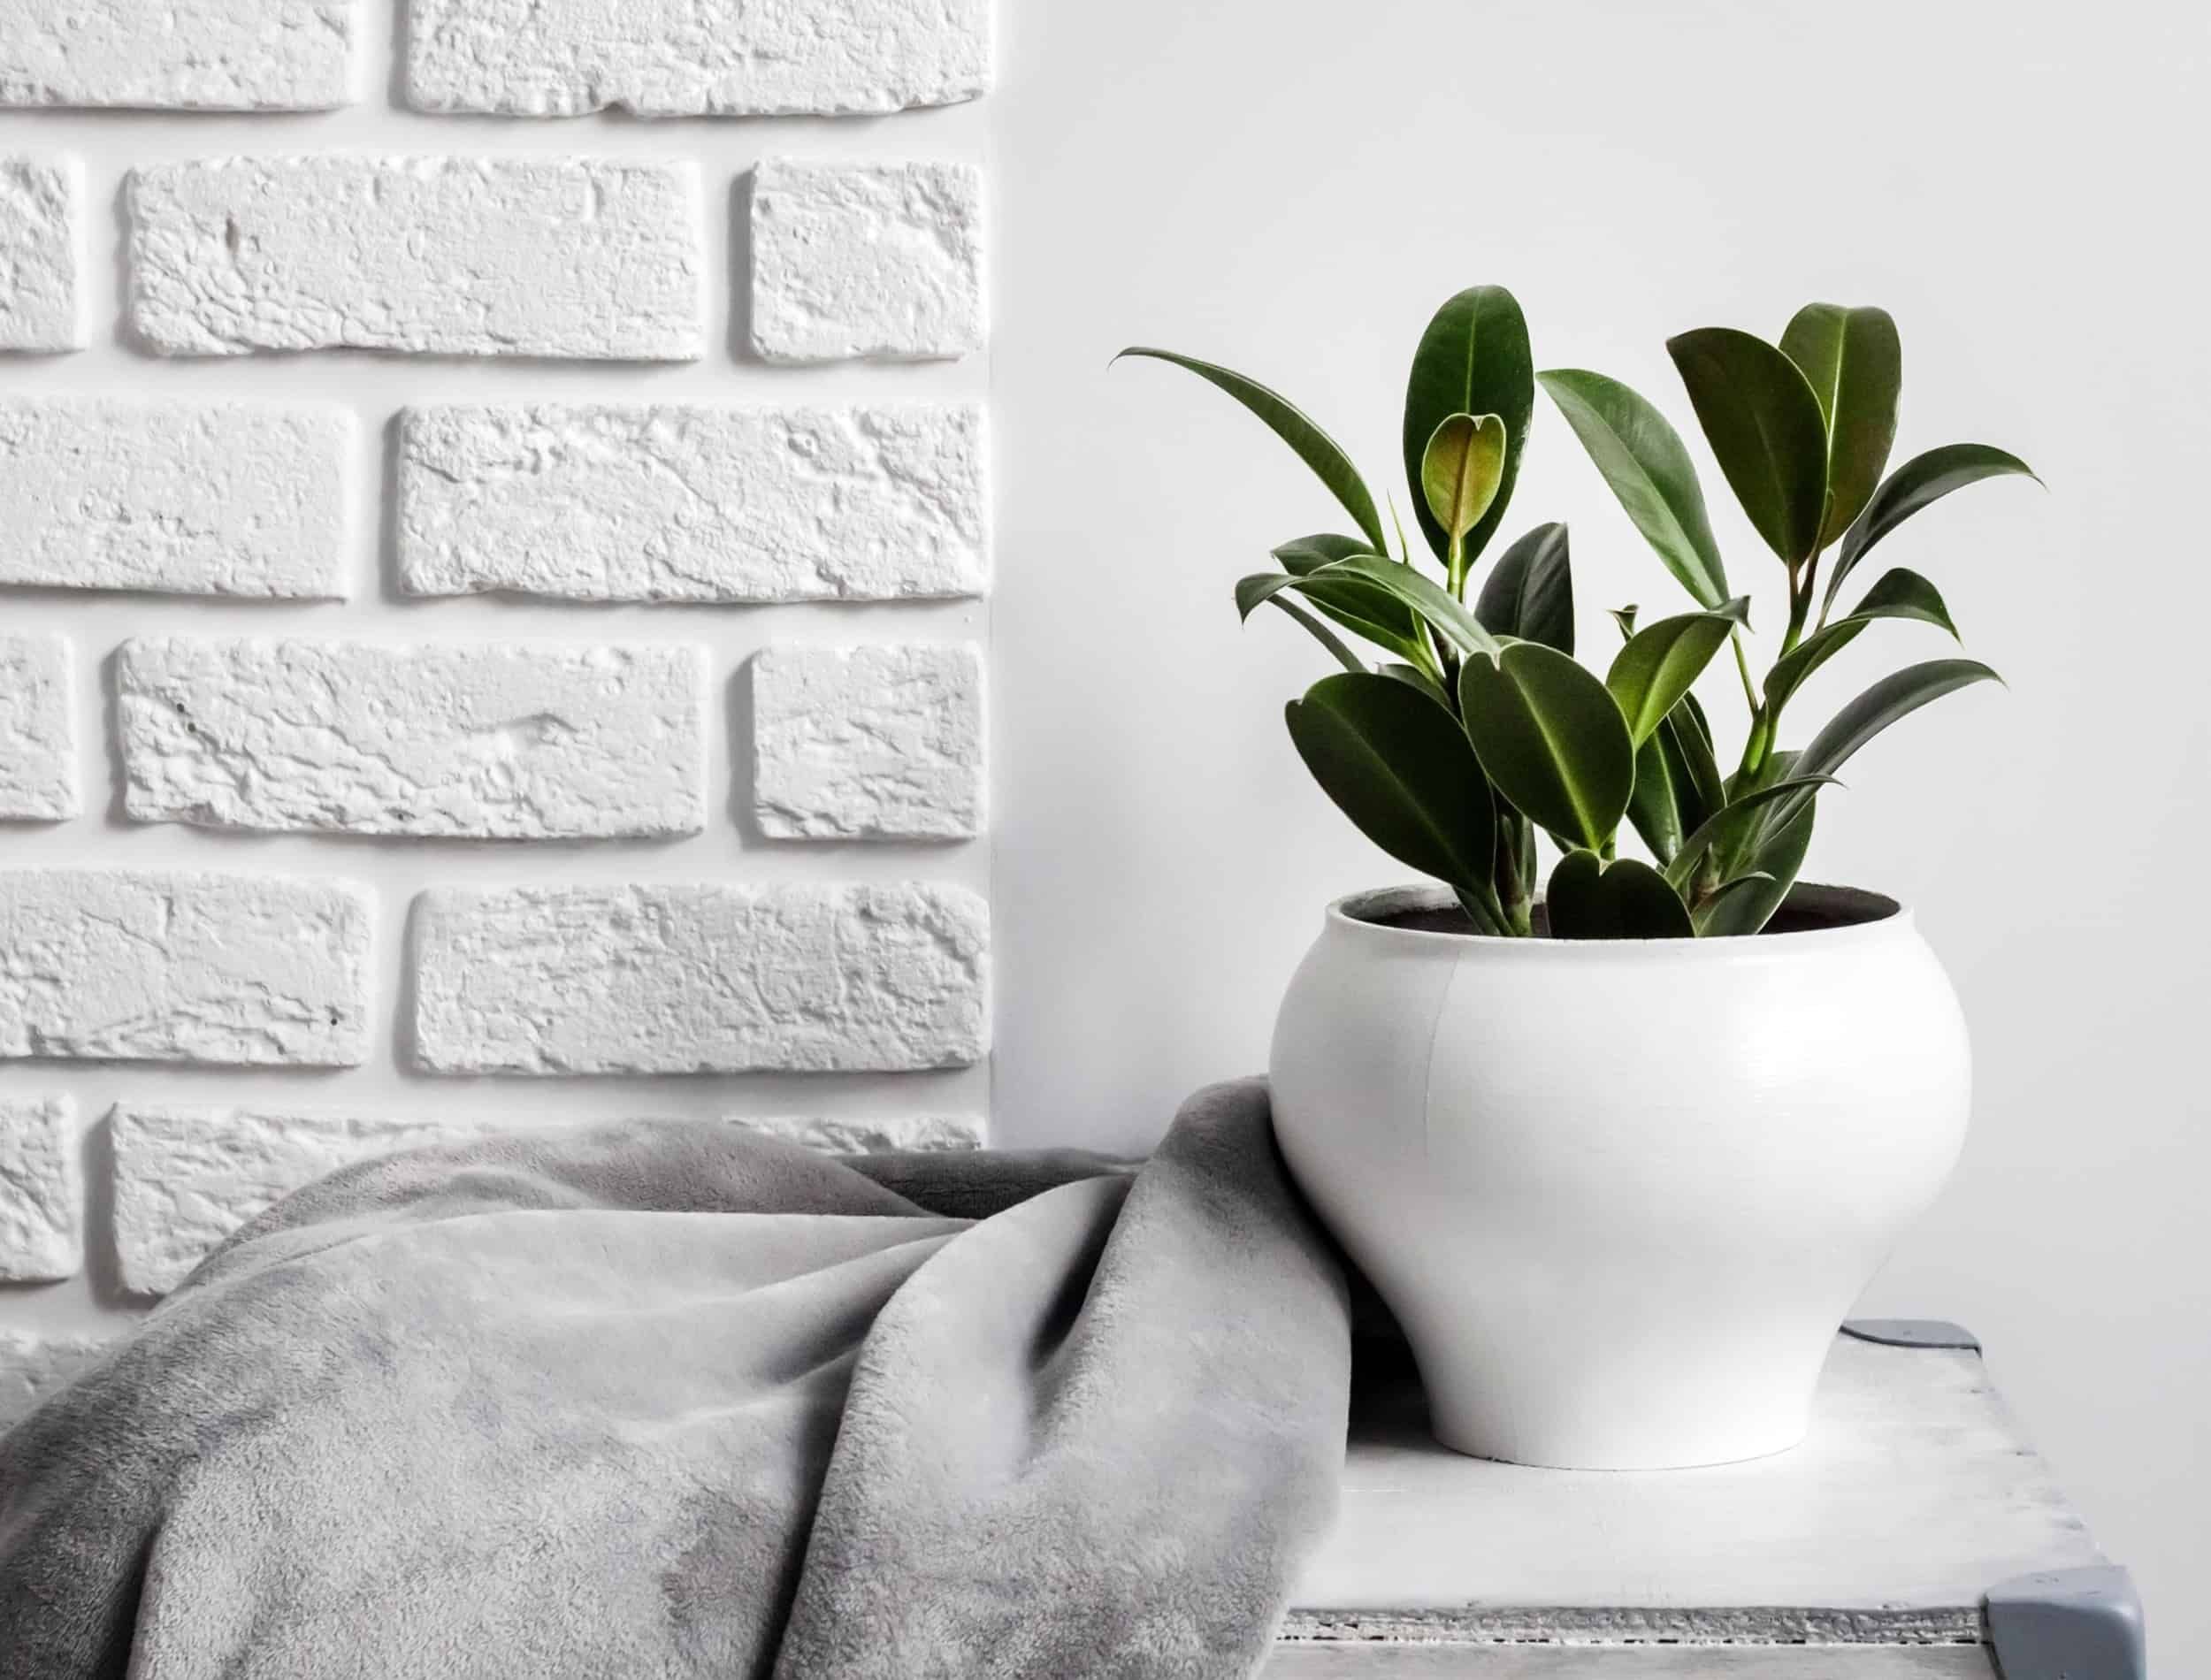 Young rubber plant (Ficus elastica) in white flower pot with gray soft fleece blanket near it. White wall with bricks on background